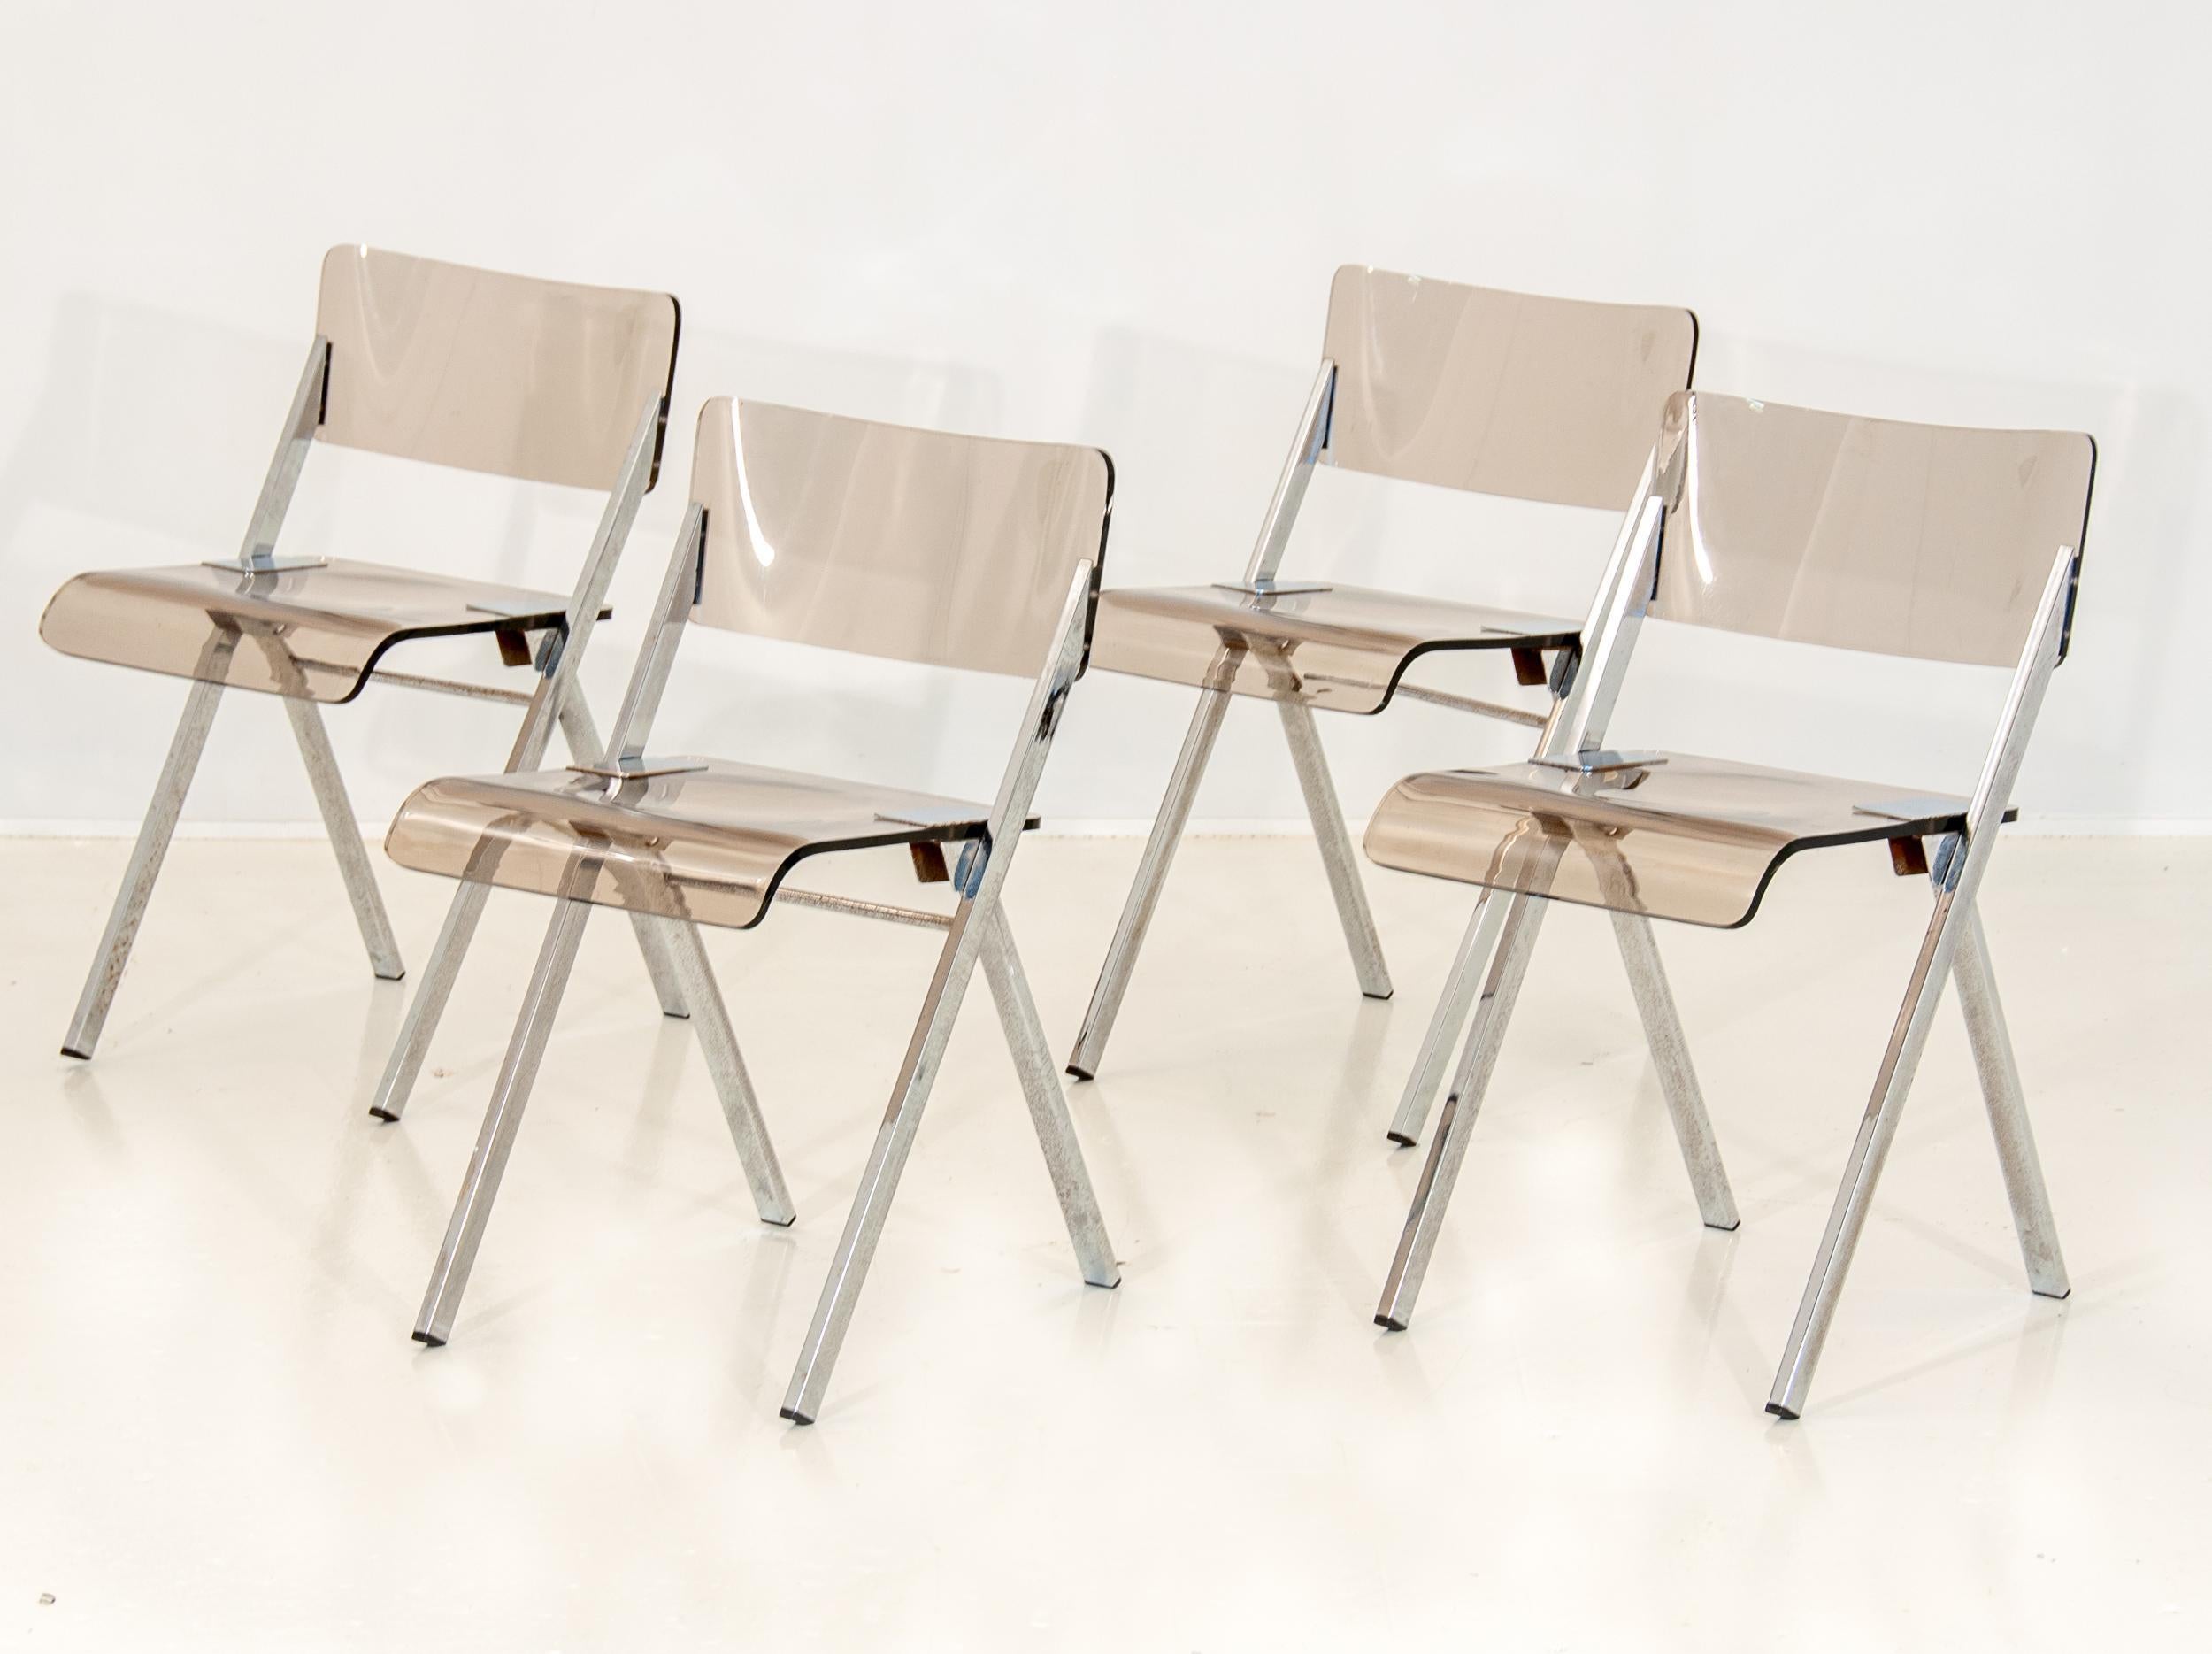 A beautiful set of midcentury folding Lucite chairs. A brilliant and thick pale Smokey Lucite seat and curved back with chrome legs and hinges. Midcentury Italian Lucite in good condition with minor scuffs. Wear consistent with age and use.